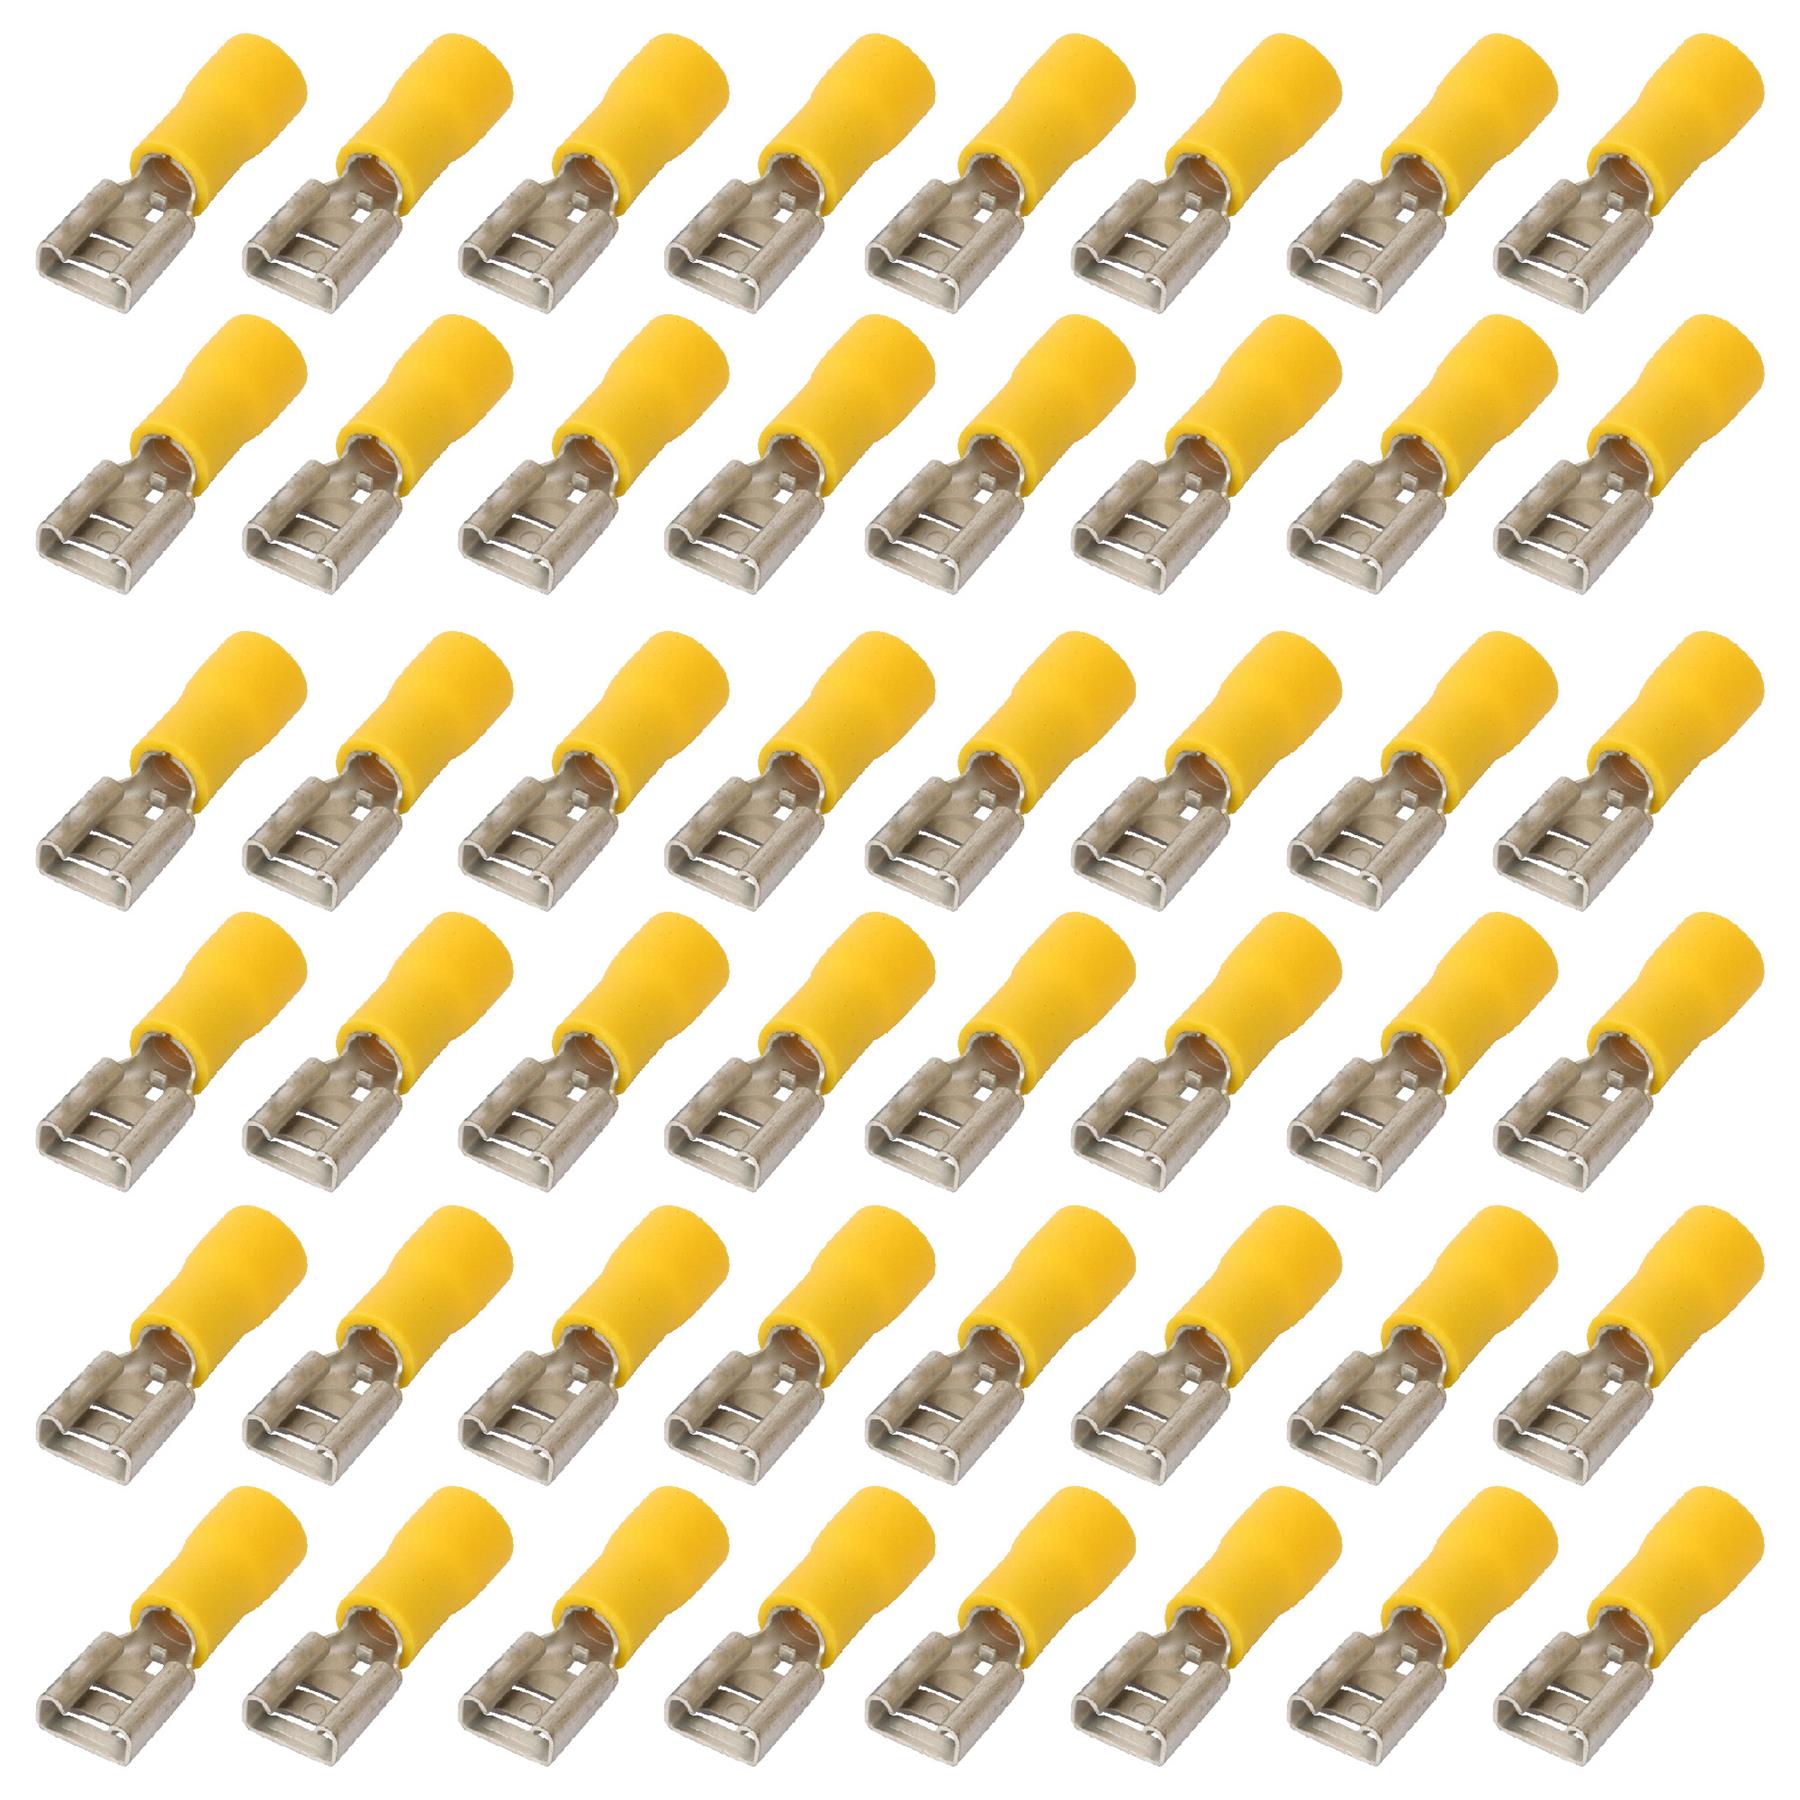 100Pcs Semi- Insulated Female Yellow Terminals Crimp Connector Electrical Terminal